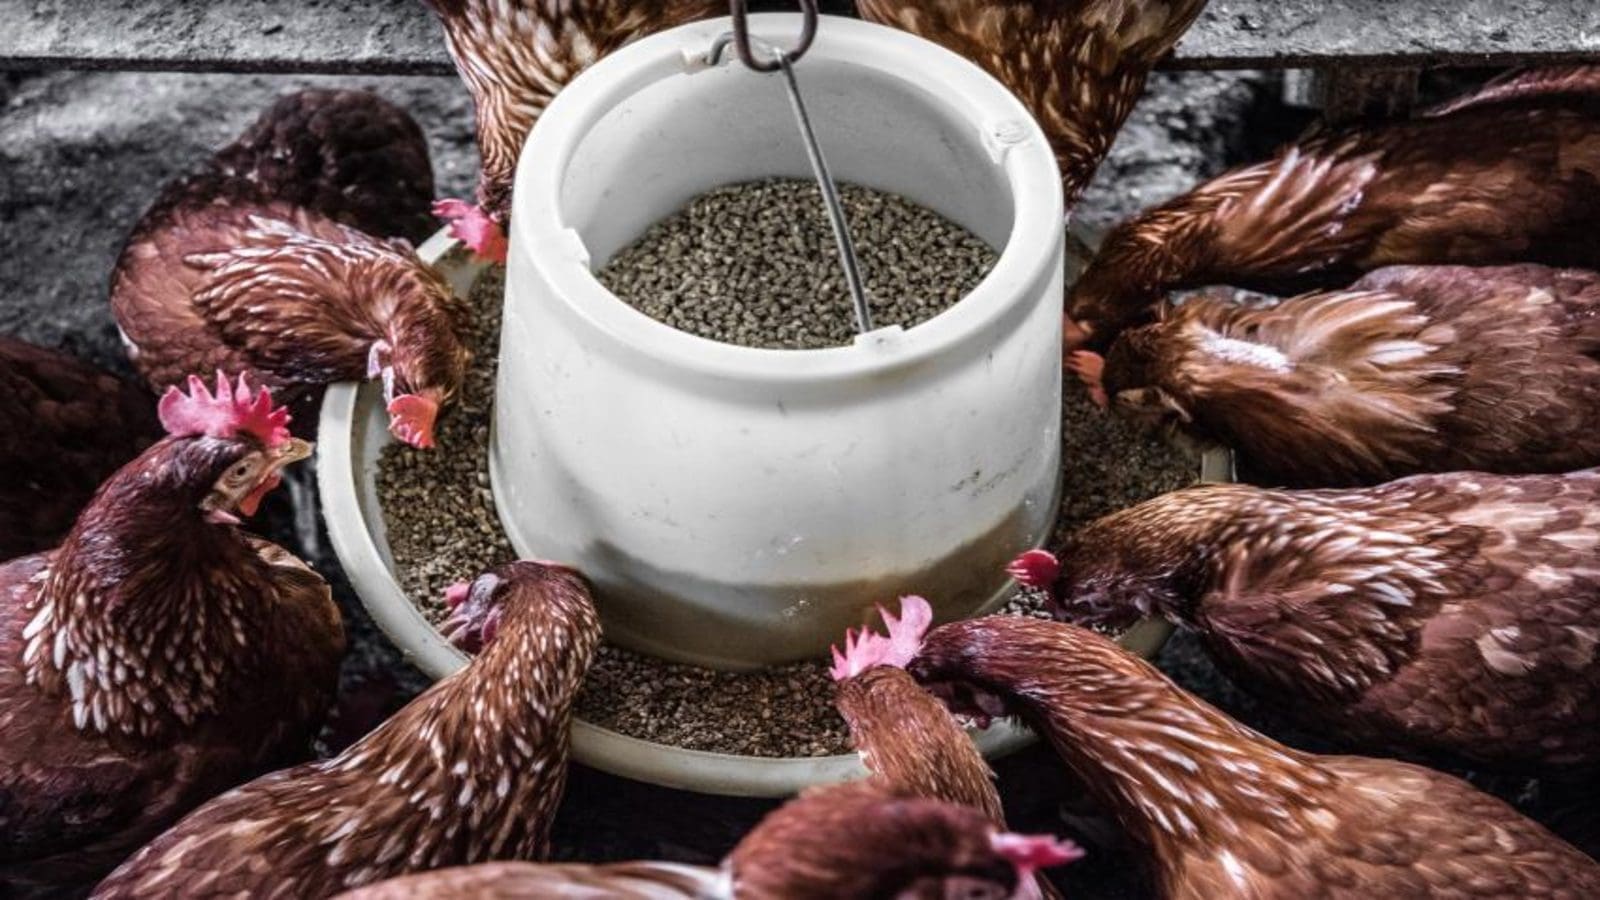 South African poultry producers face crisis amidst bird flu outbreak, power shortages